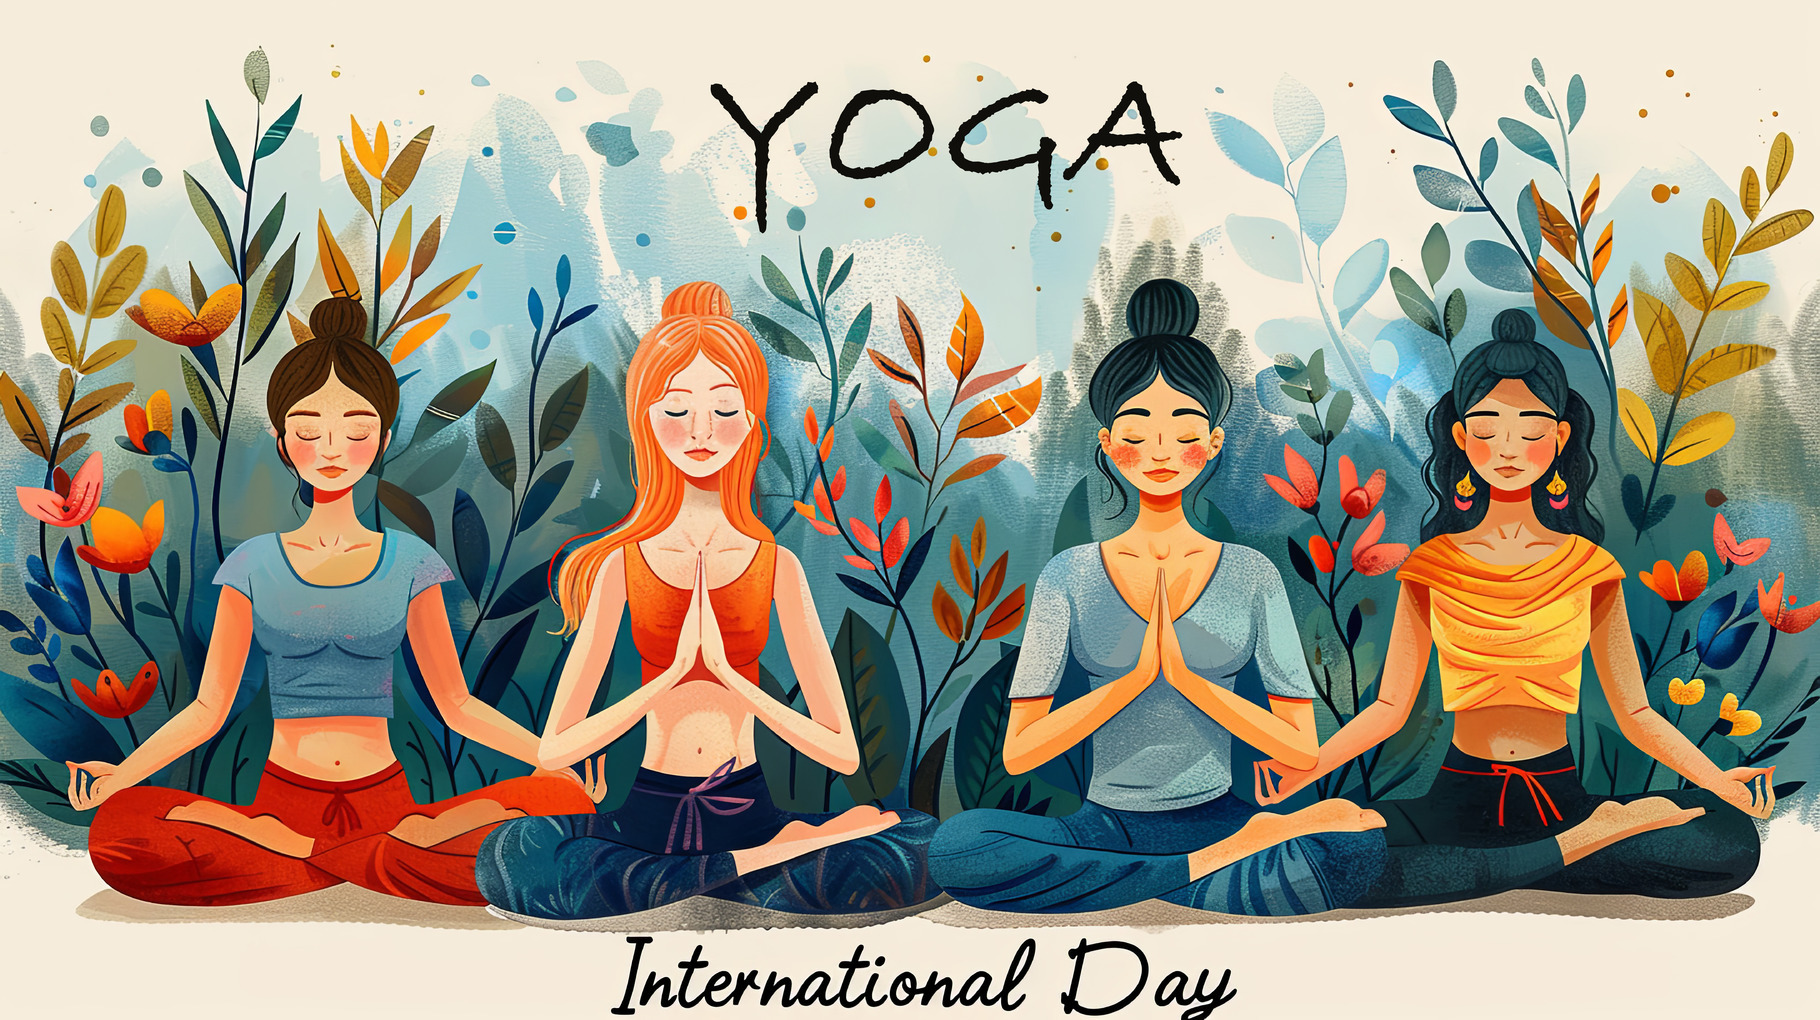 Illustration of Women Practicing Yoga in a Peaceful Garden | Stock ...